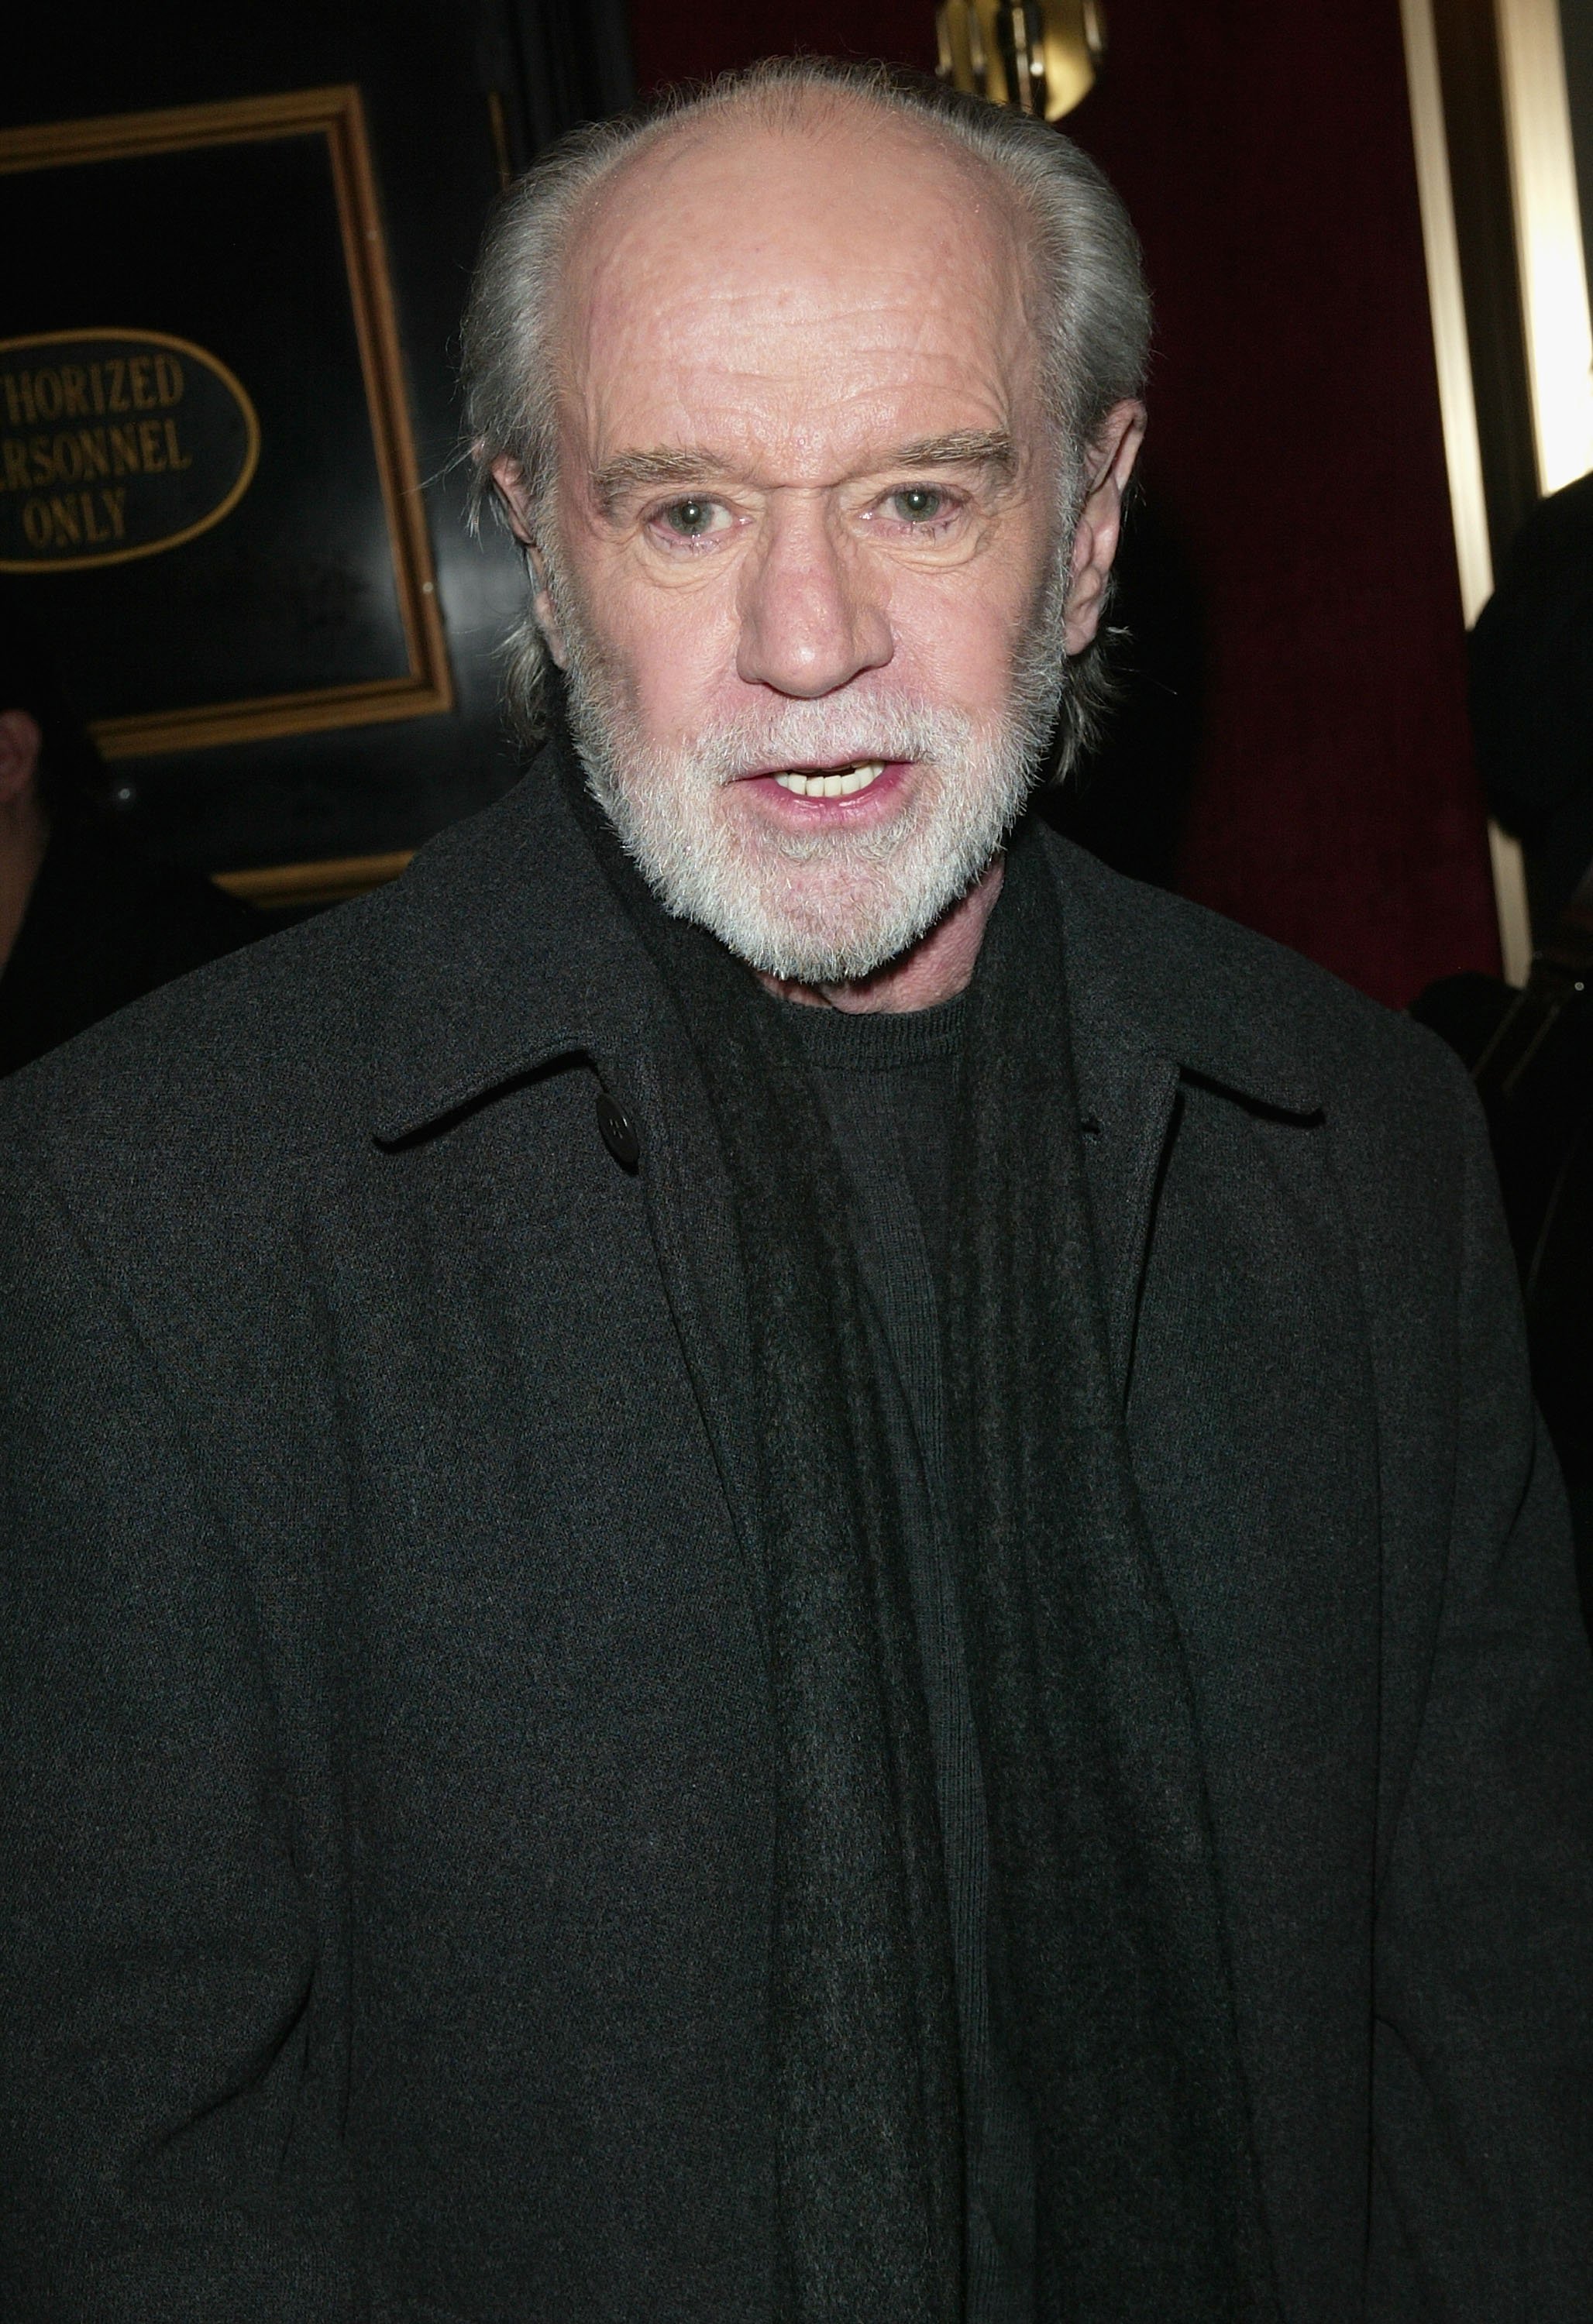 Comedian George Carlin attends the "Jersey Girl" film premiere on March 9, 2004 at the Ziegfeld Theater, in New York City. | Source: Getty Images